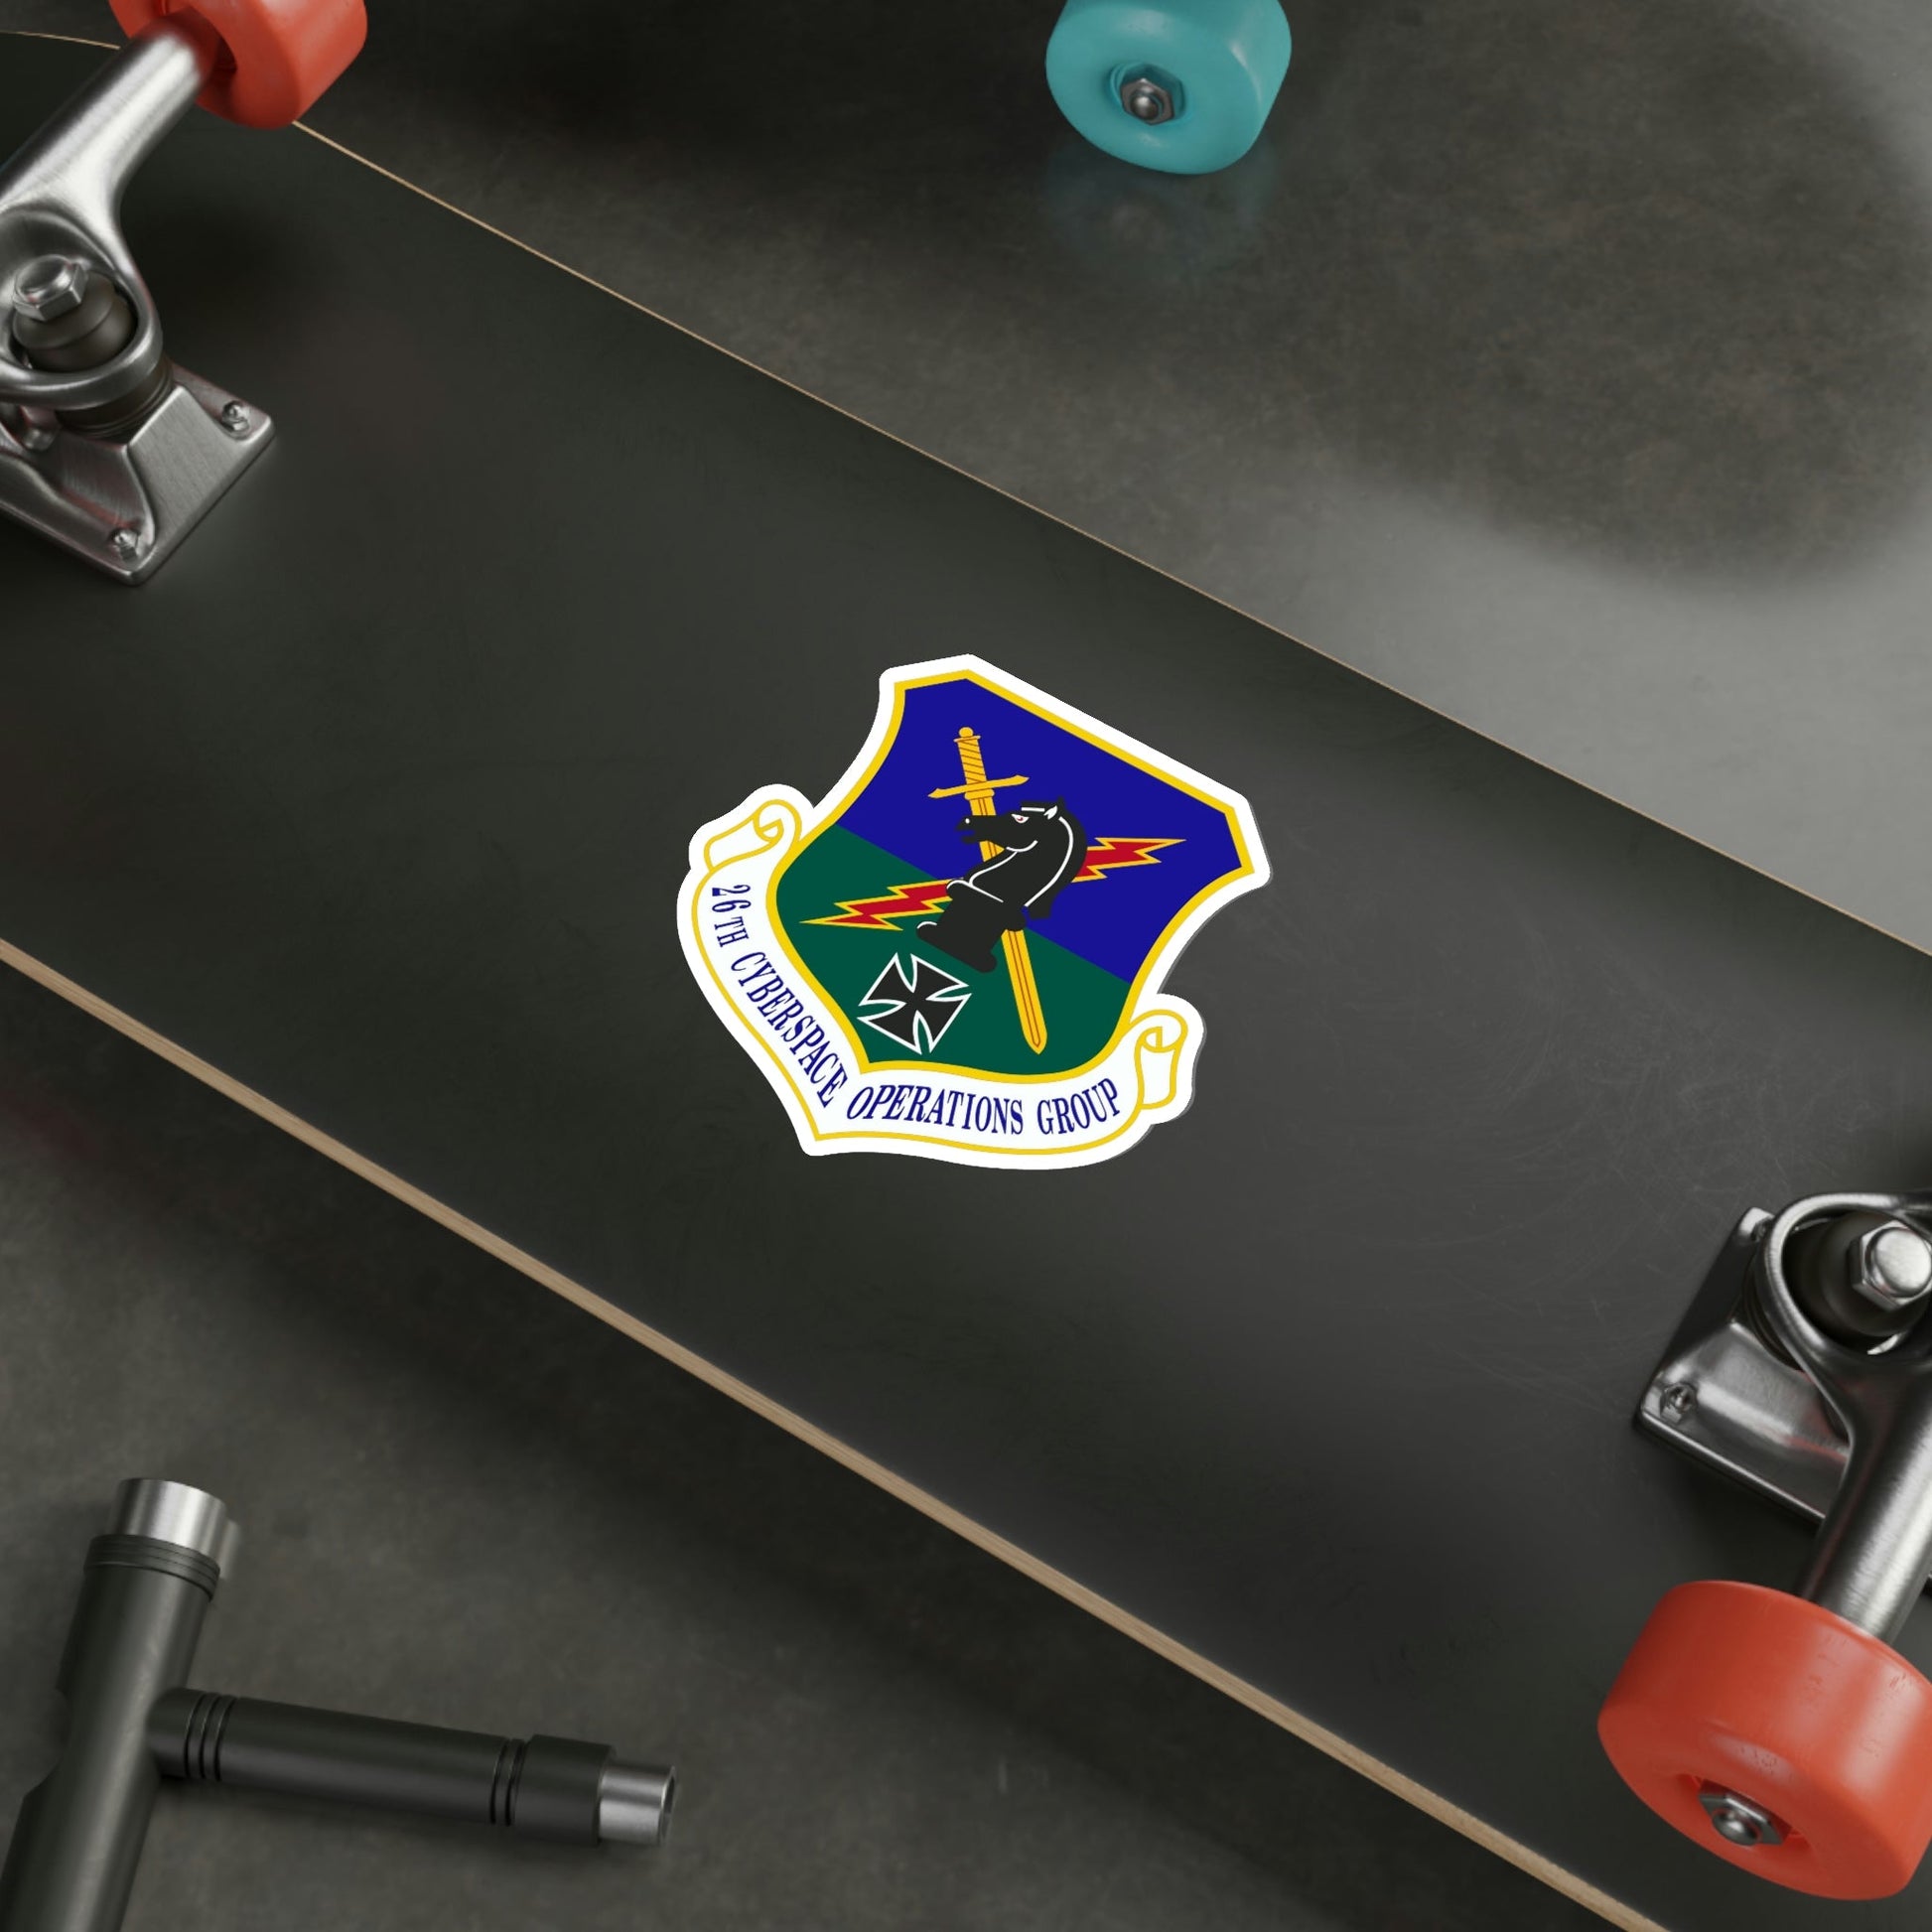 26th Cyberspace Operations Group (U.S. Air Force) STICKER Vinyl Die-Cut Decal-The Sticker Space